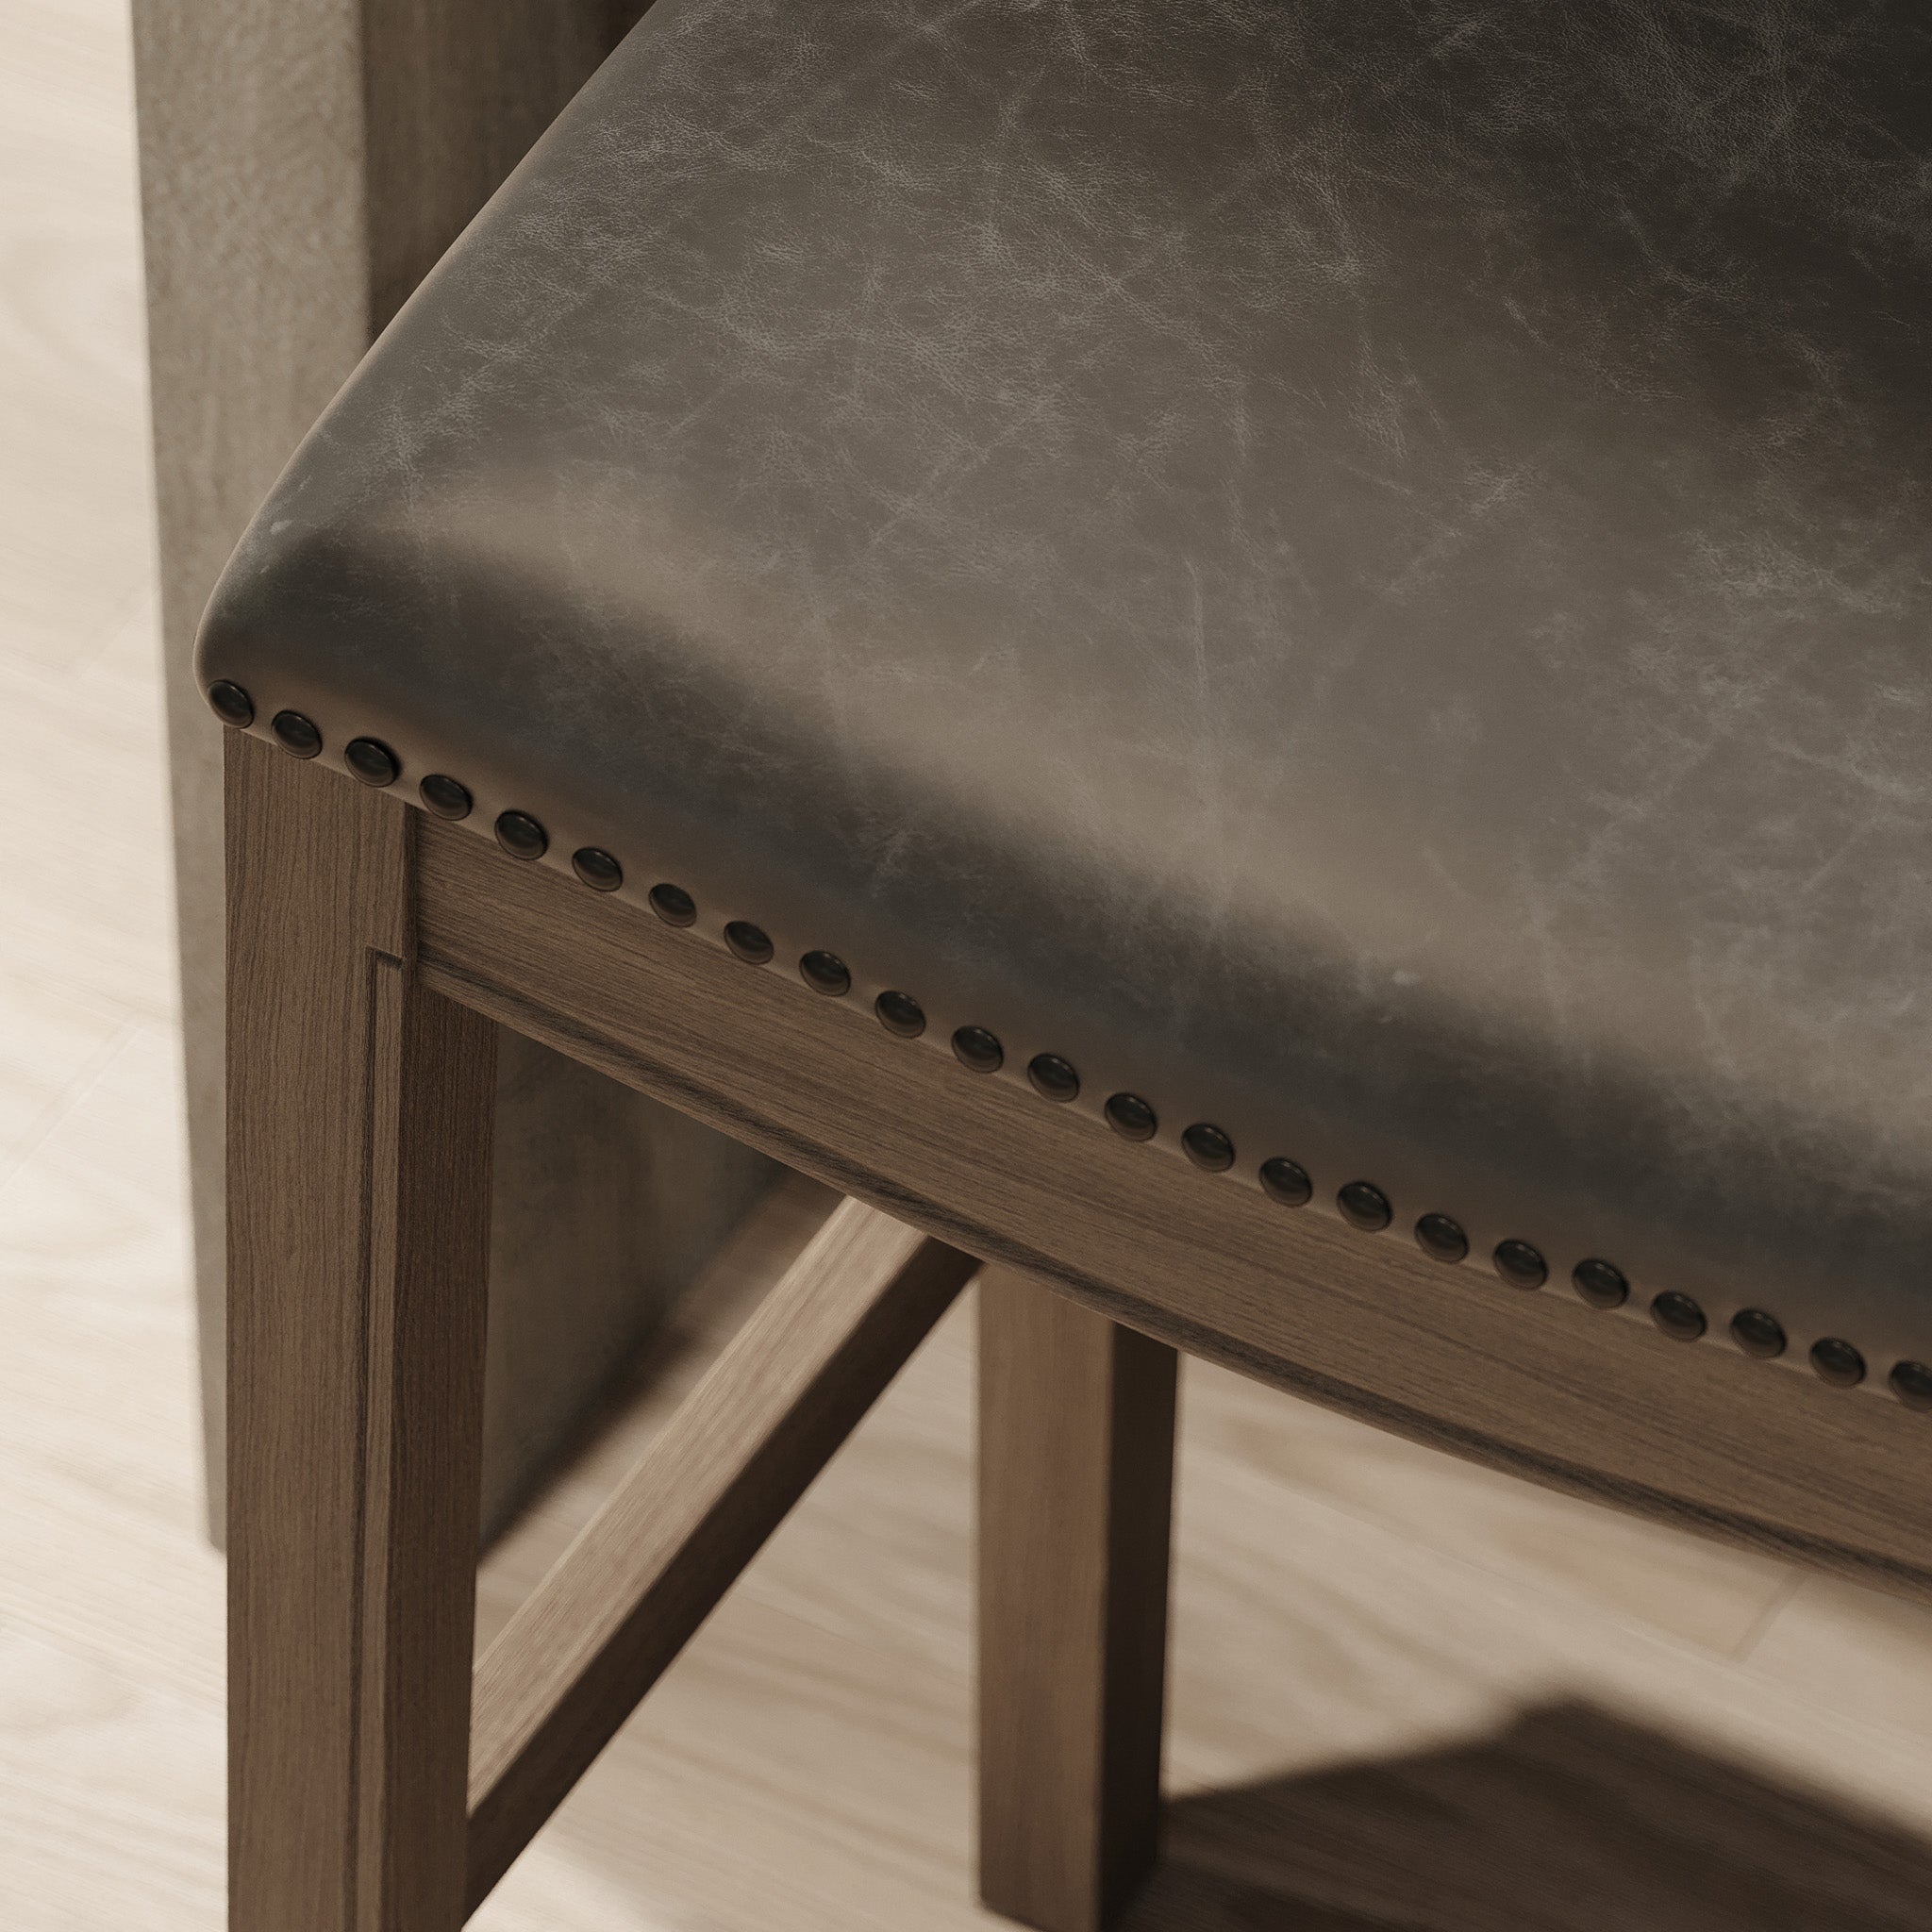 Adrien Saddle Bar Stool in Reclaimed Oak Finish with Ronan Stone Vegan Leather in Stools by Maven Lane